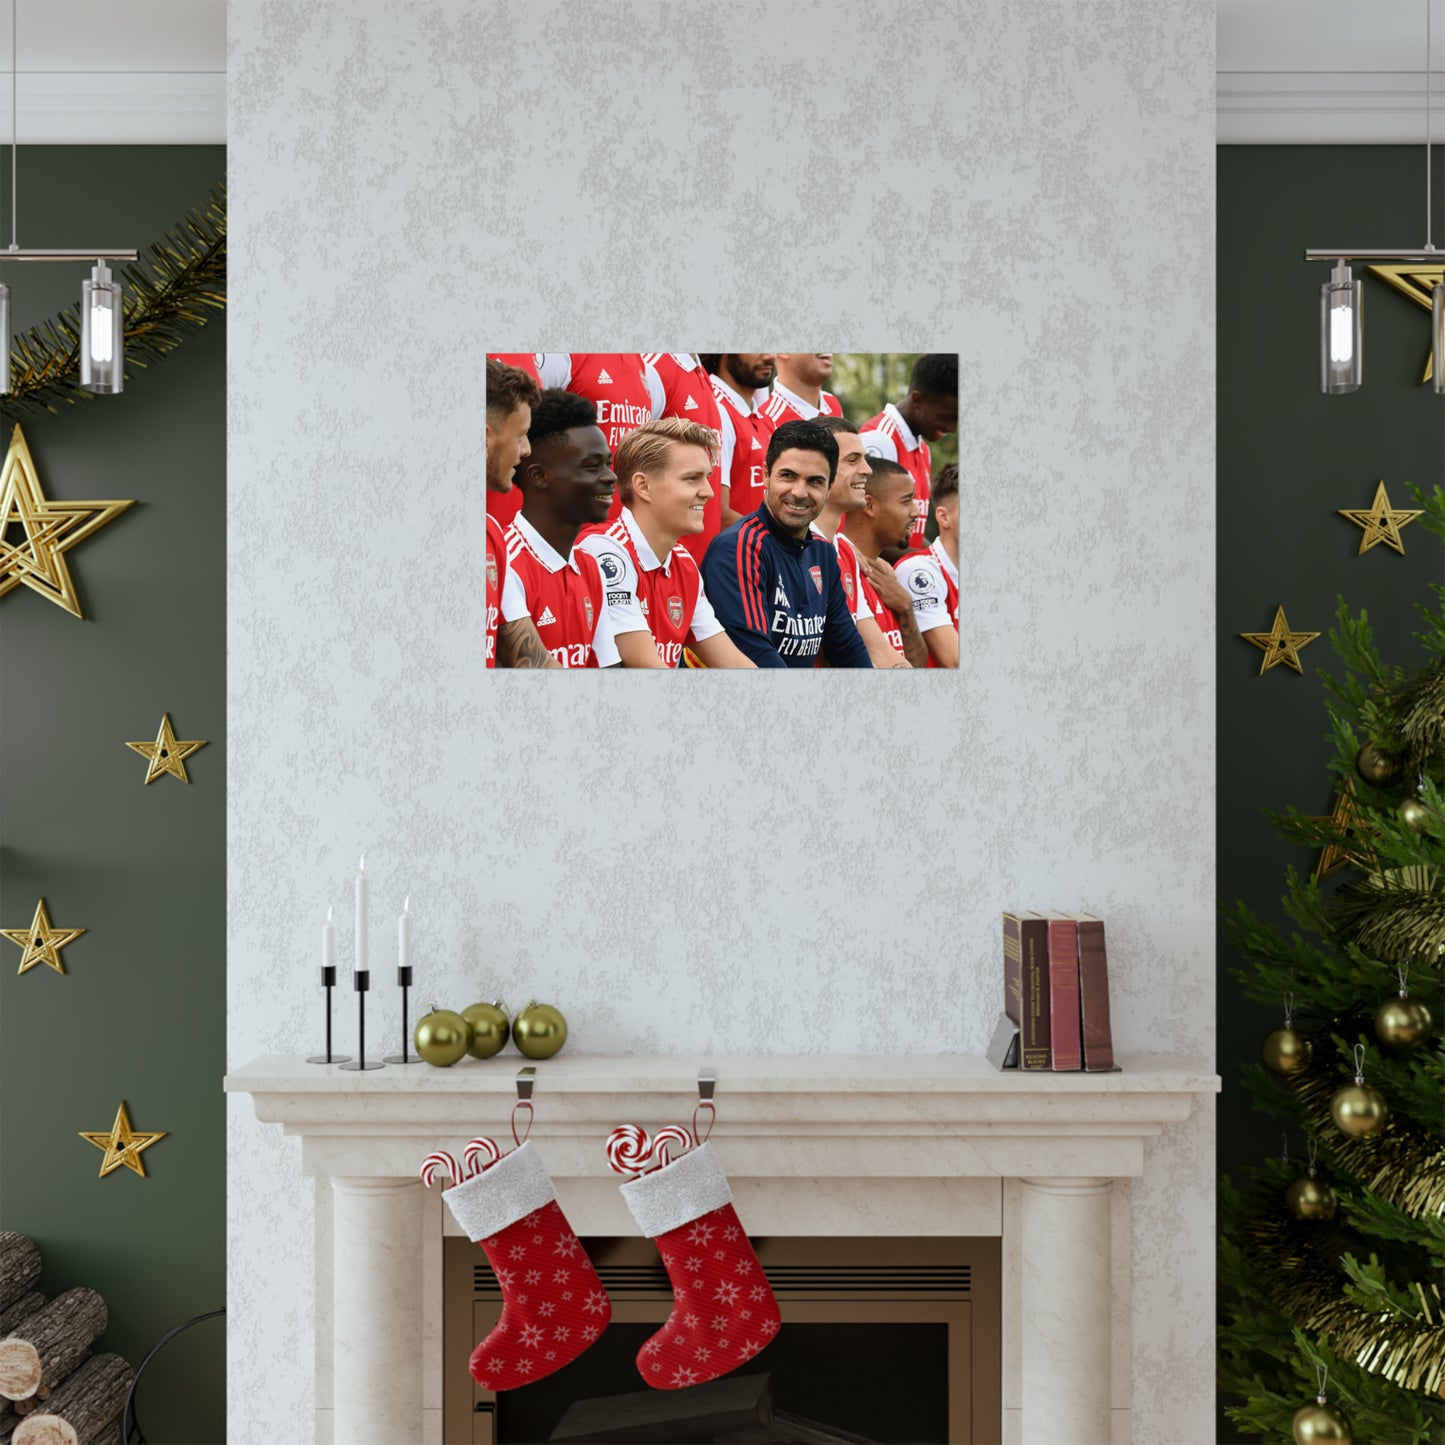 Arsenal Team Photo With Mikel Arteta, Odegaard, Saka, And Others Poster